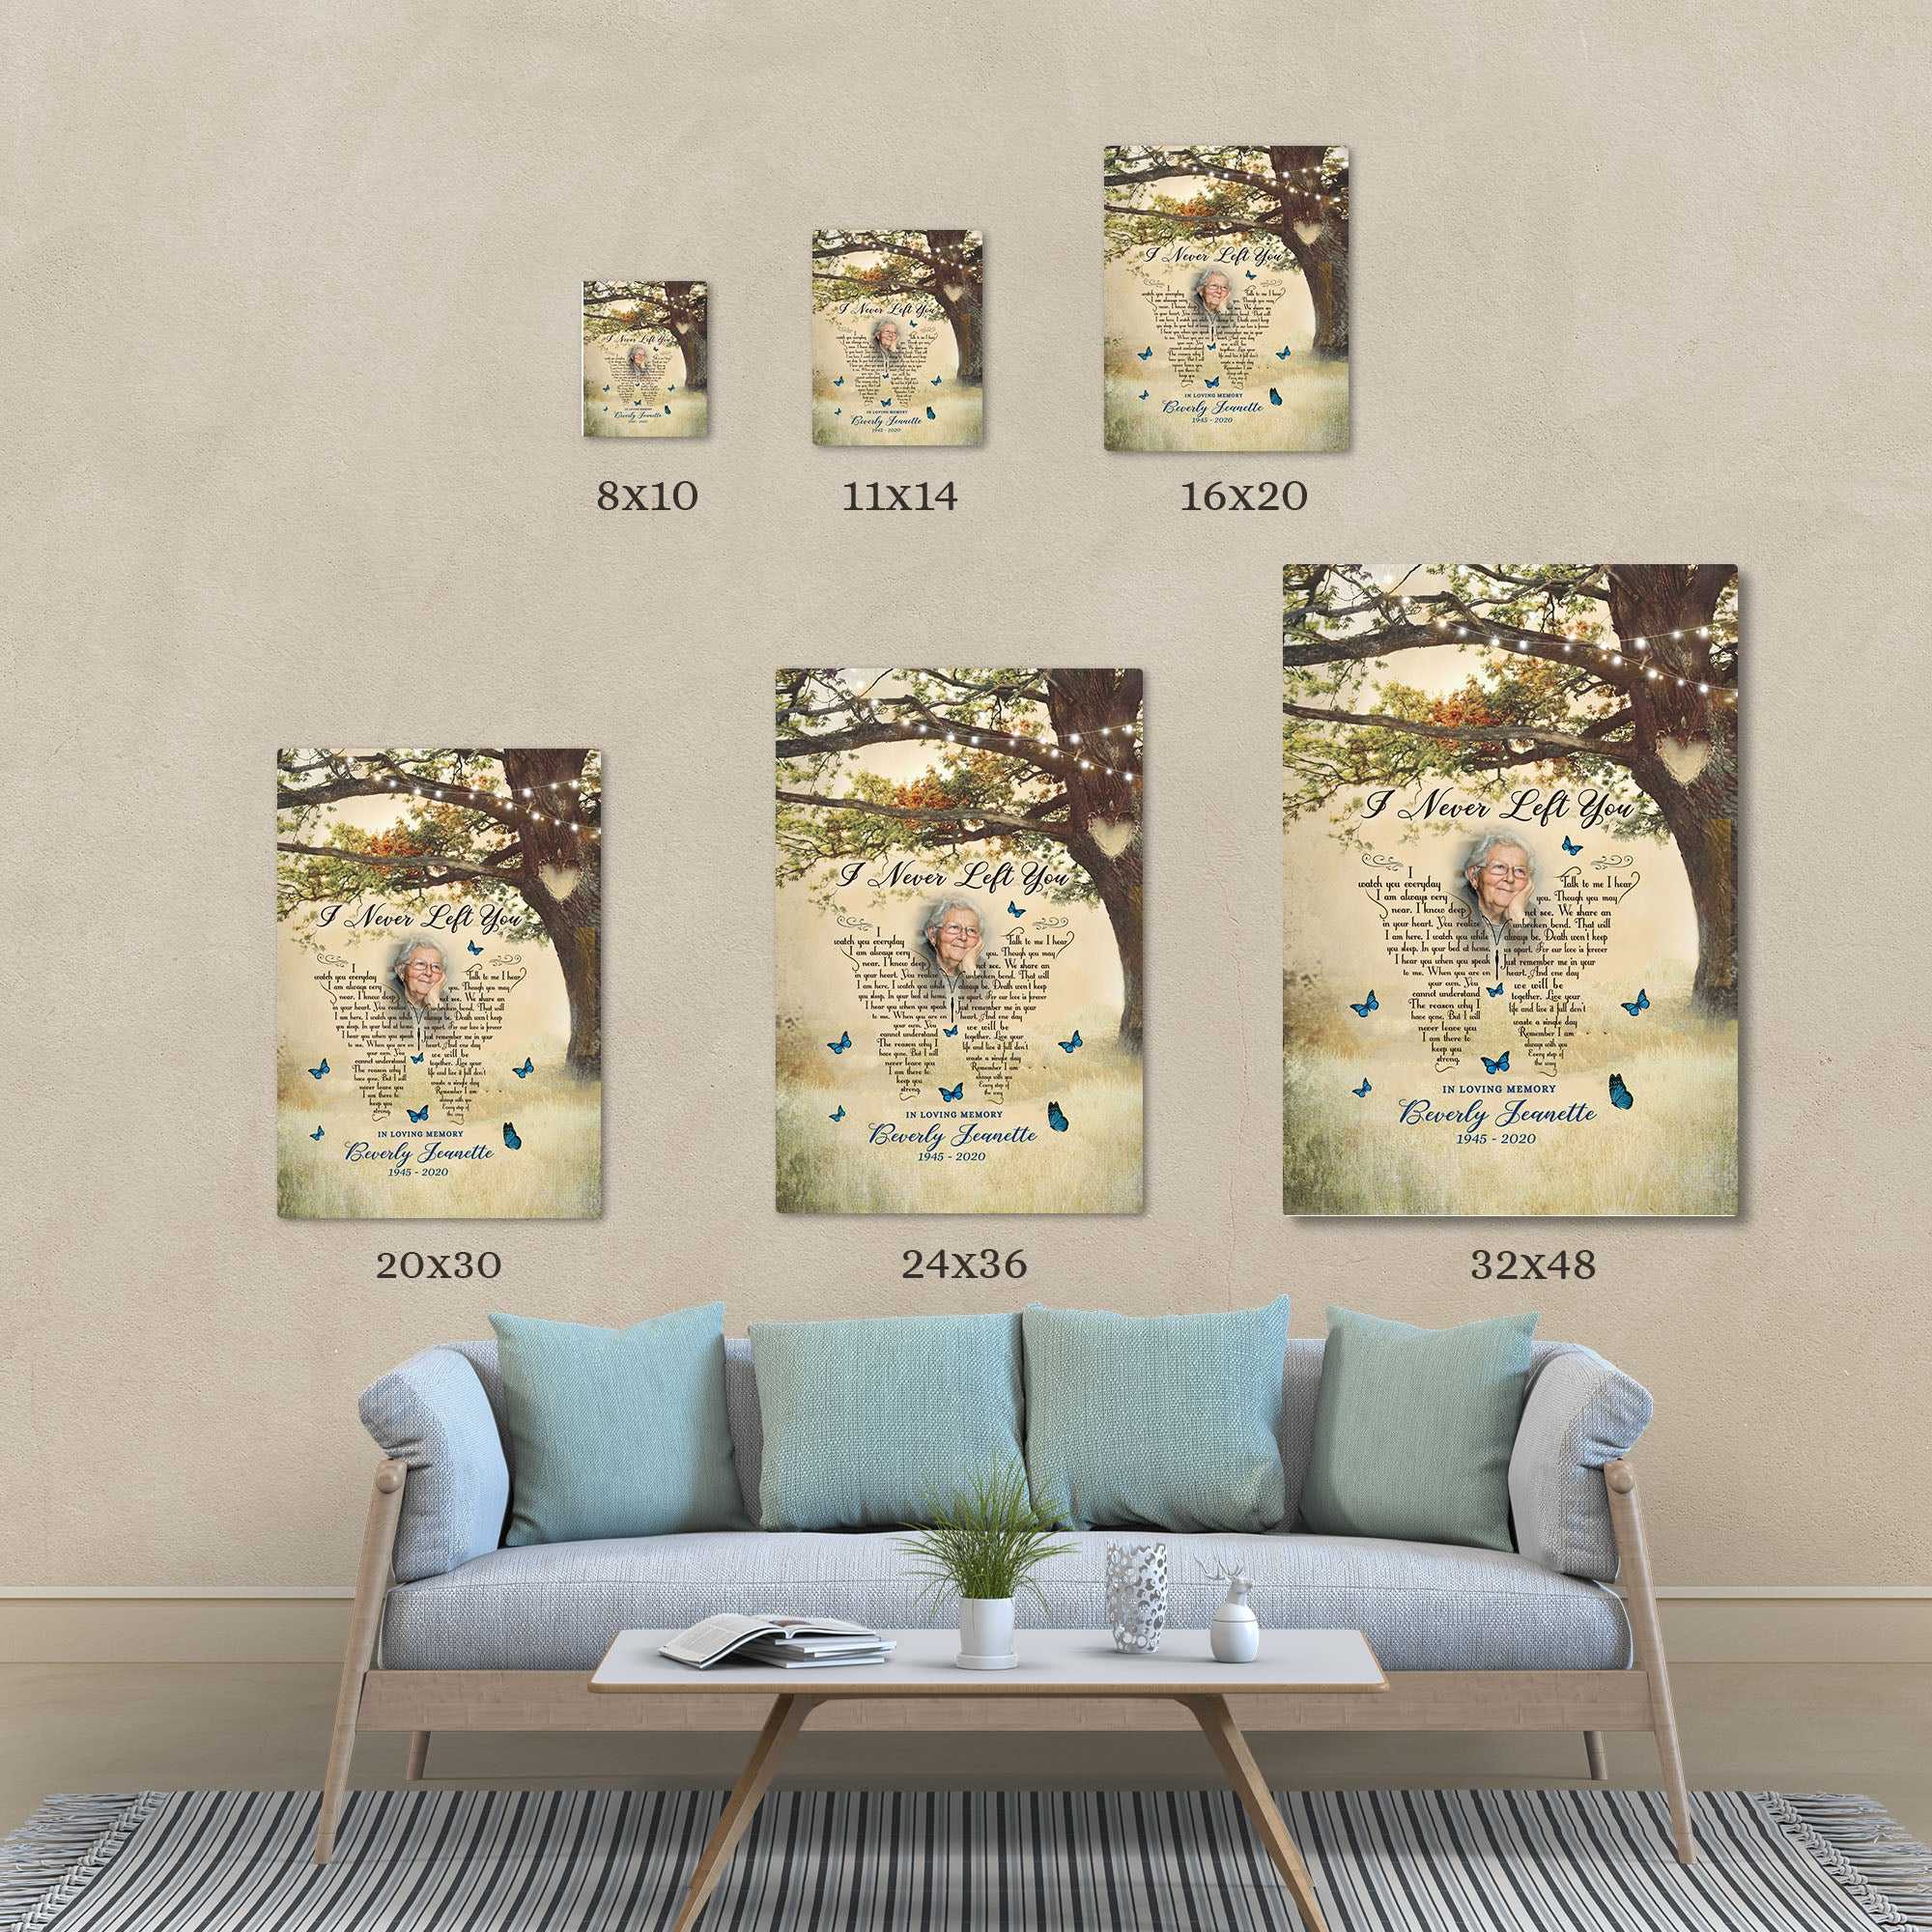 Sympathy Gifts For Loss Of Grandma, I Never Left You In Loving Memory Canvas, Mother Memorial Gifts